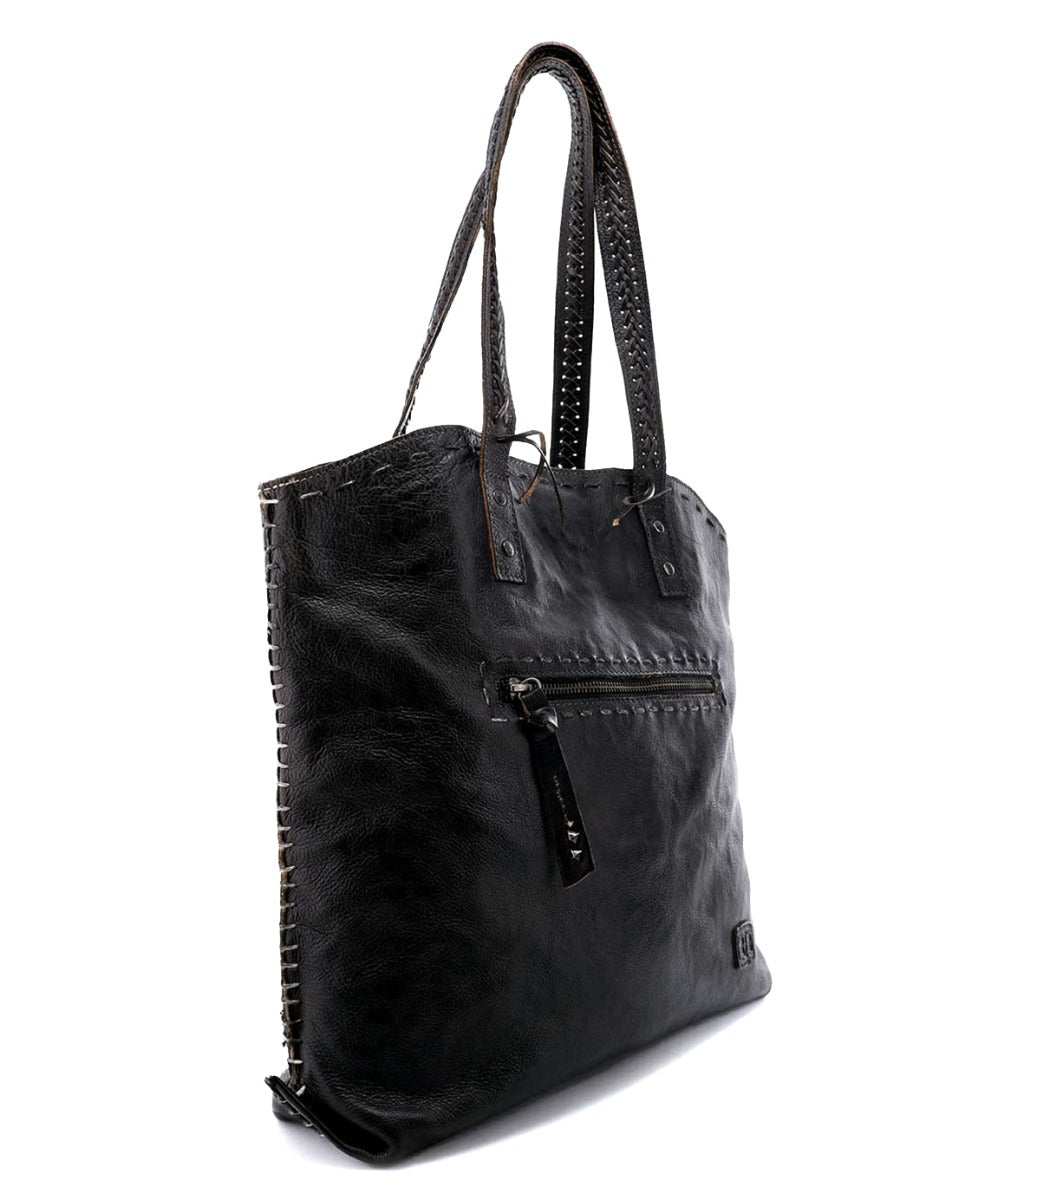 A black leather Bed Stu Barra tote bag with zippers.